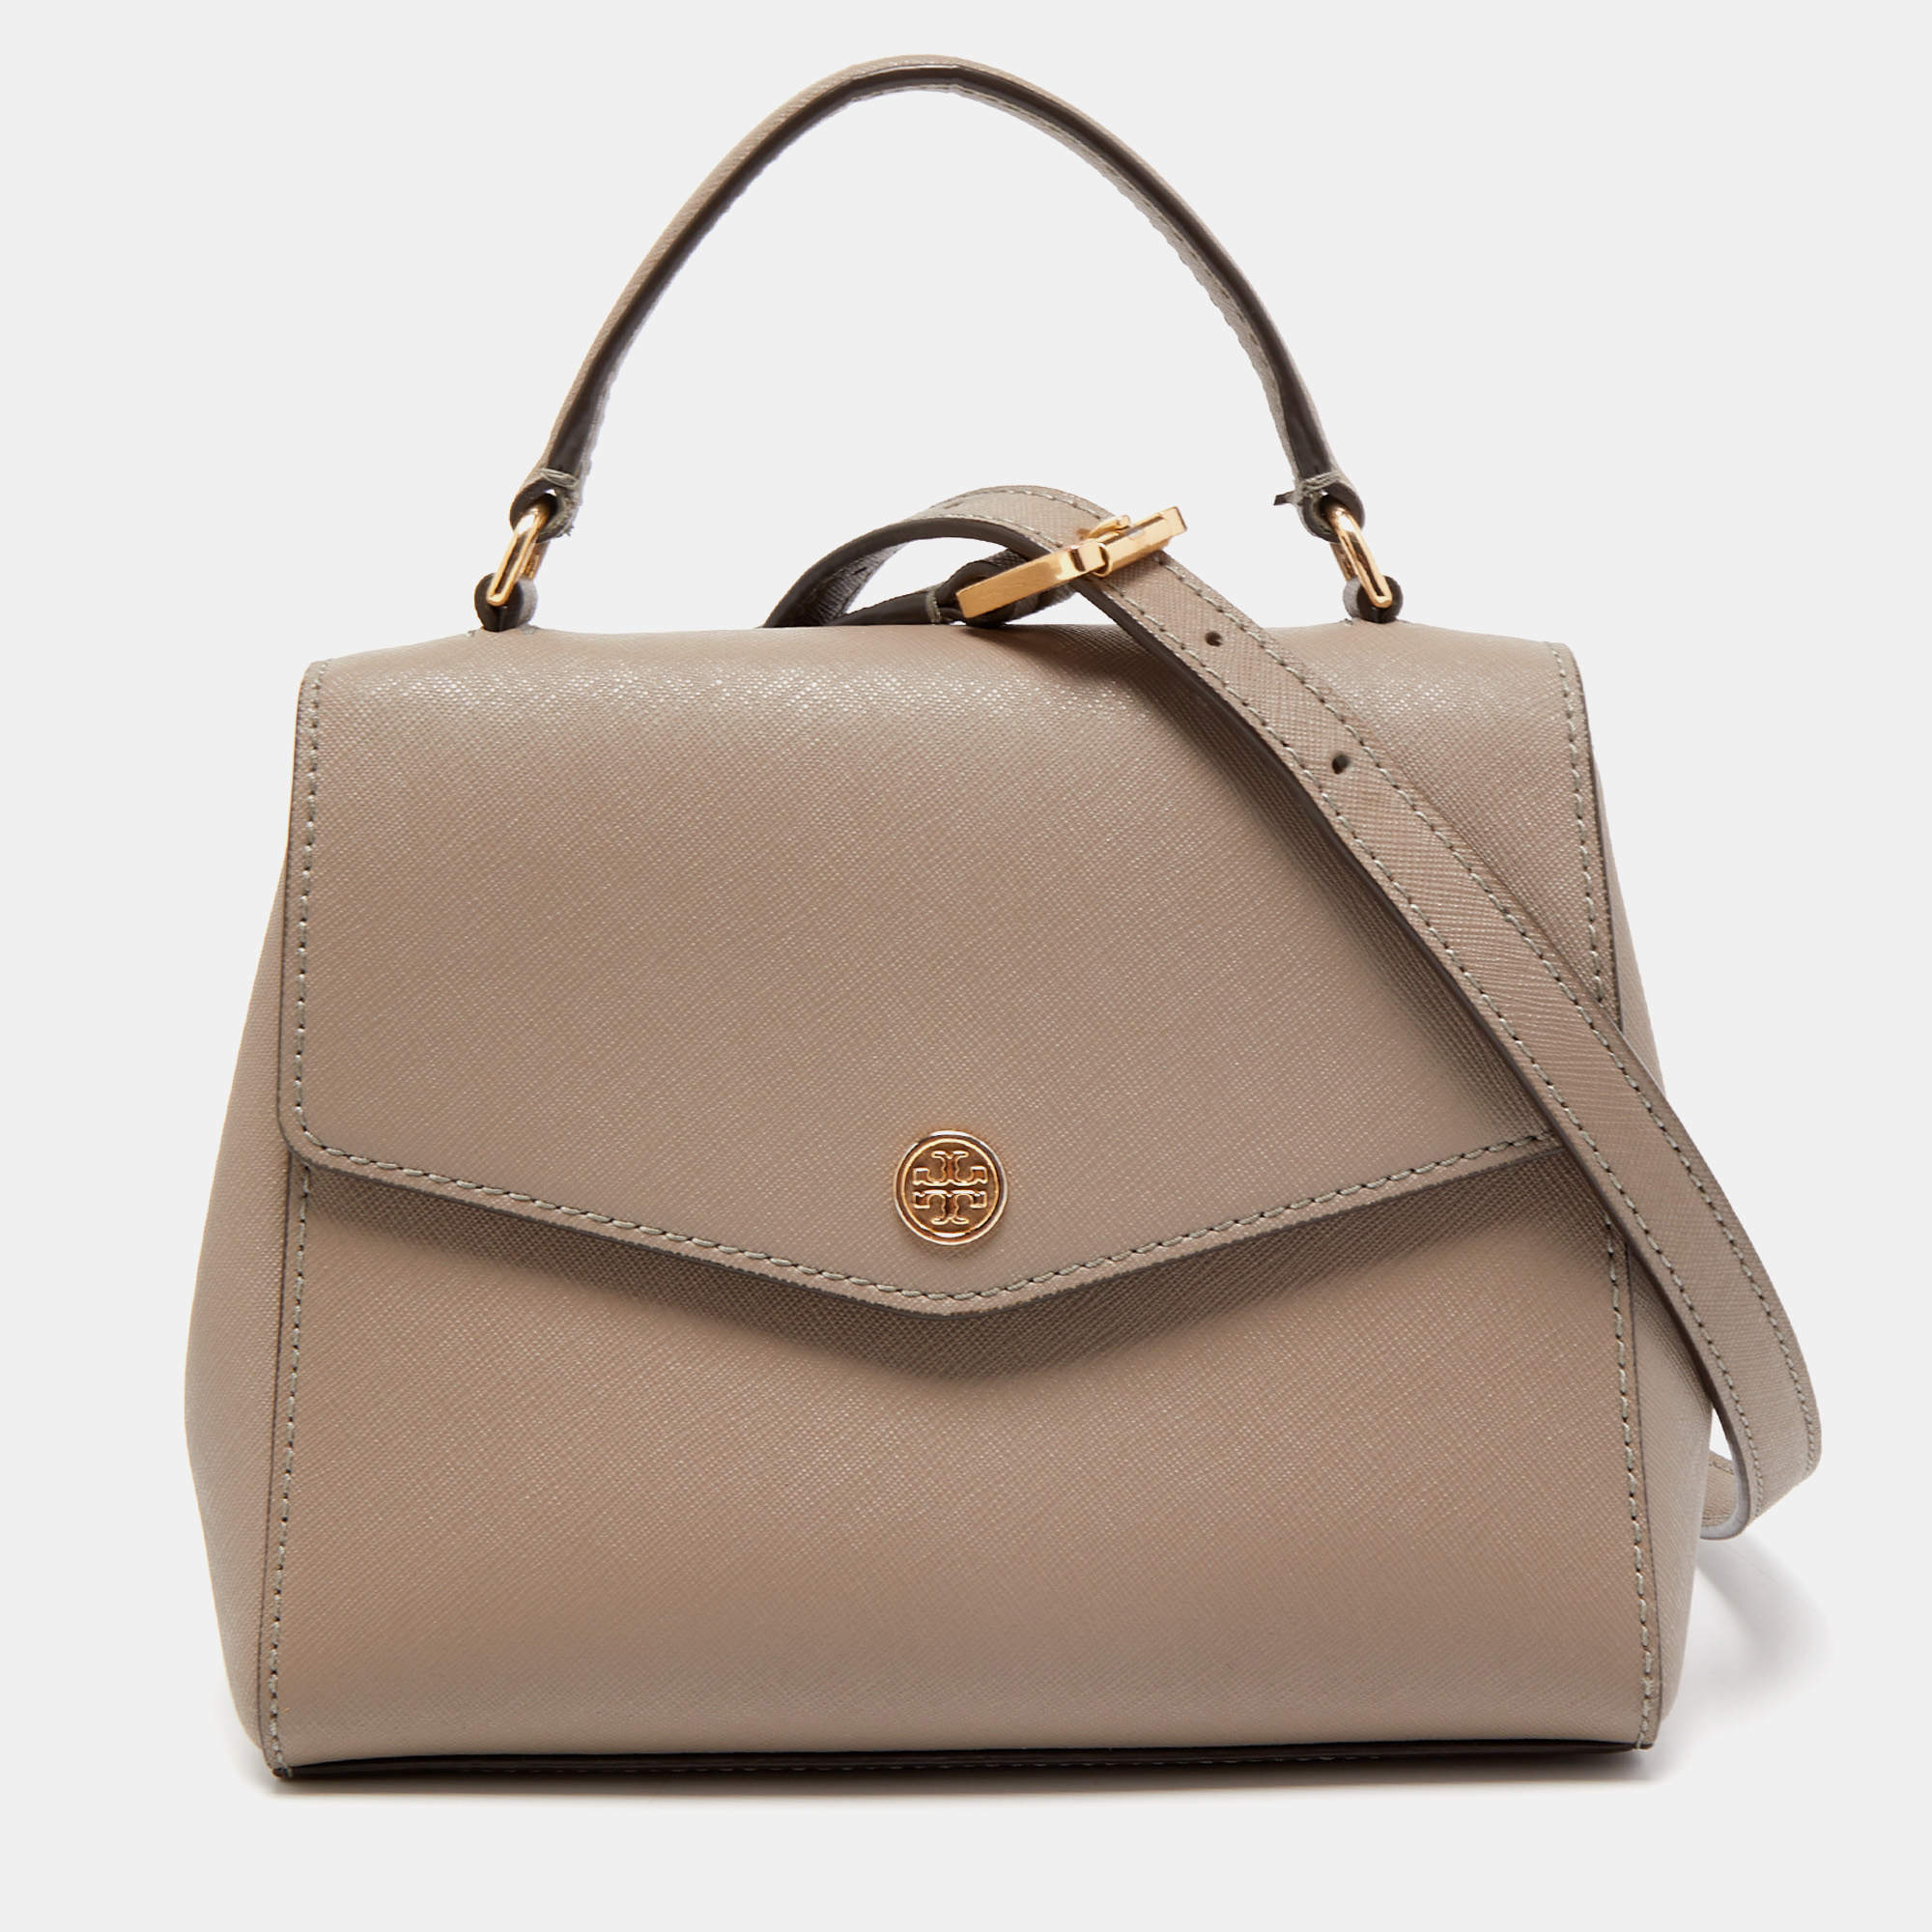 Tory Burch Robinson Small Top-handle Satchel in Green